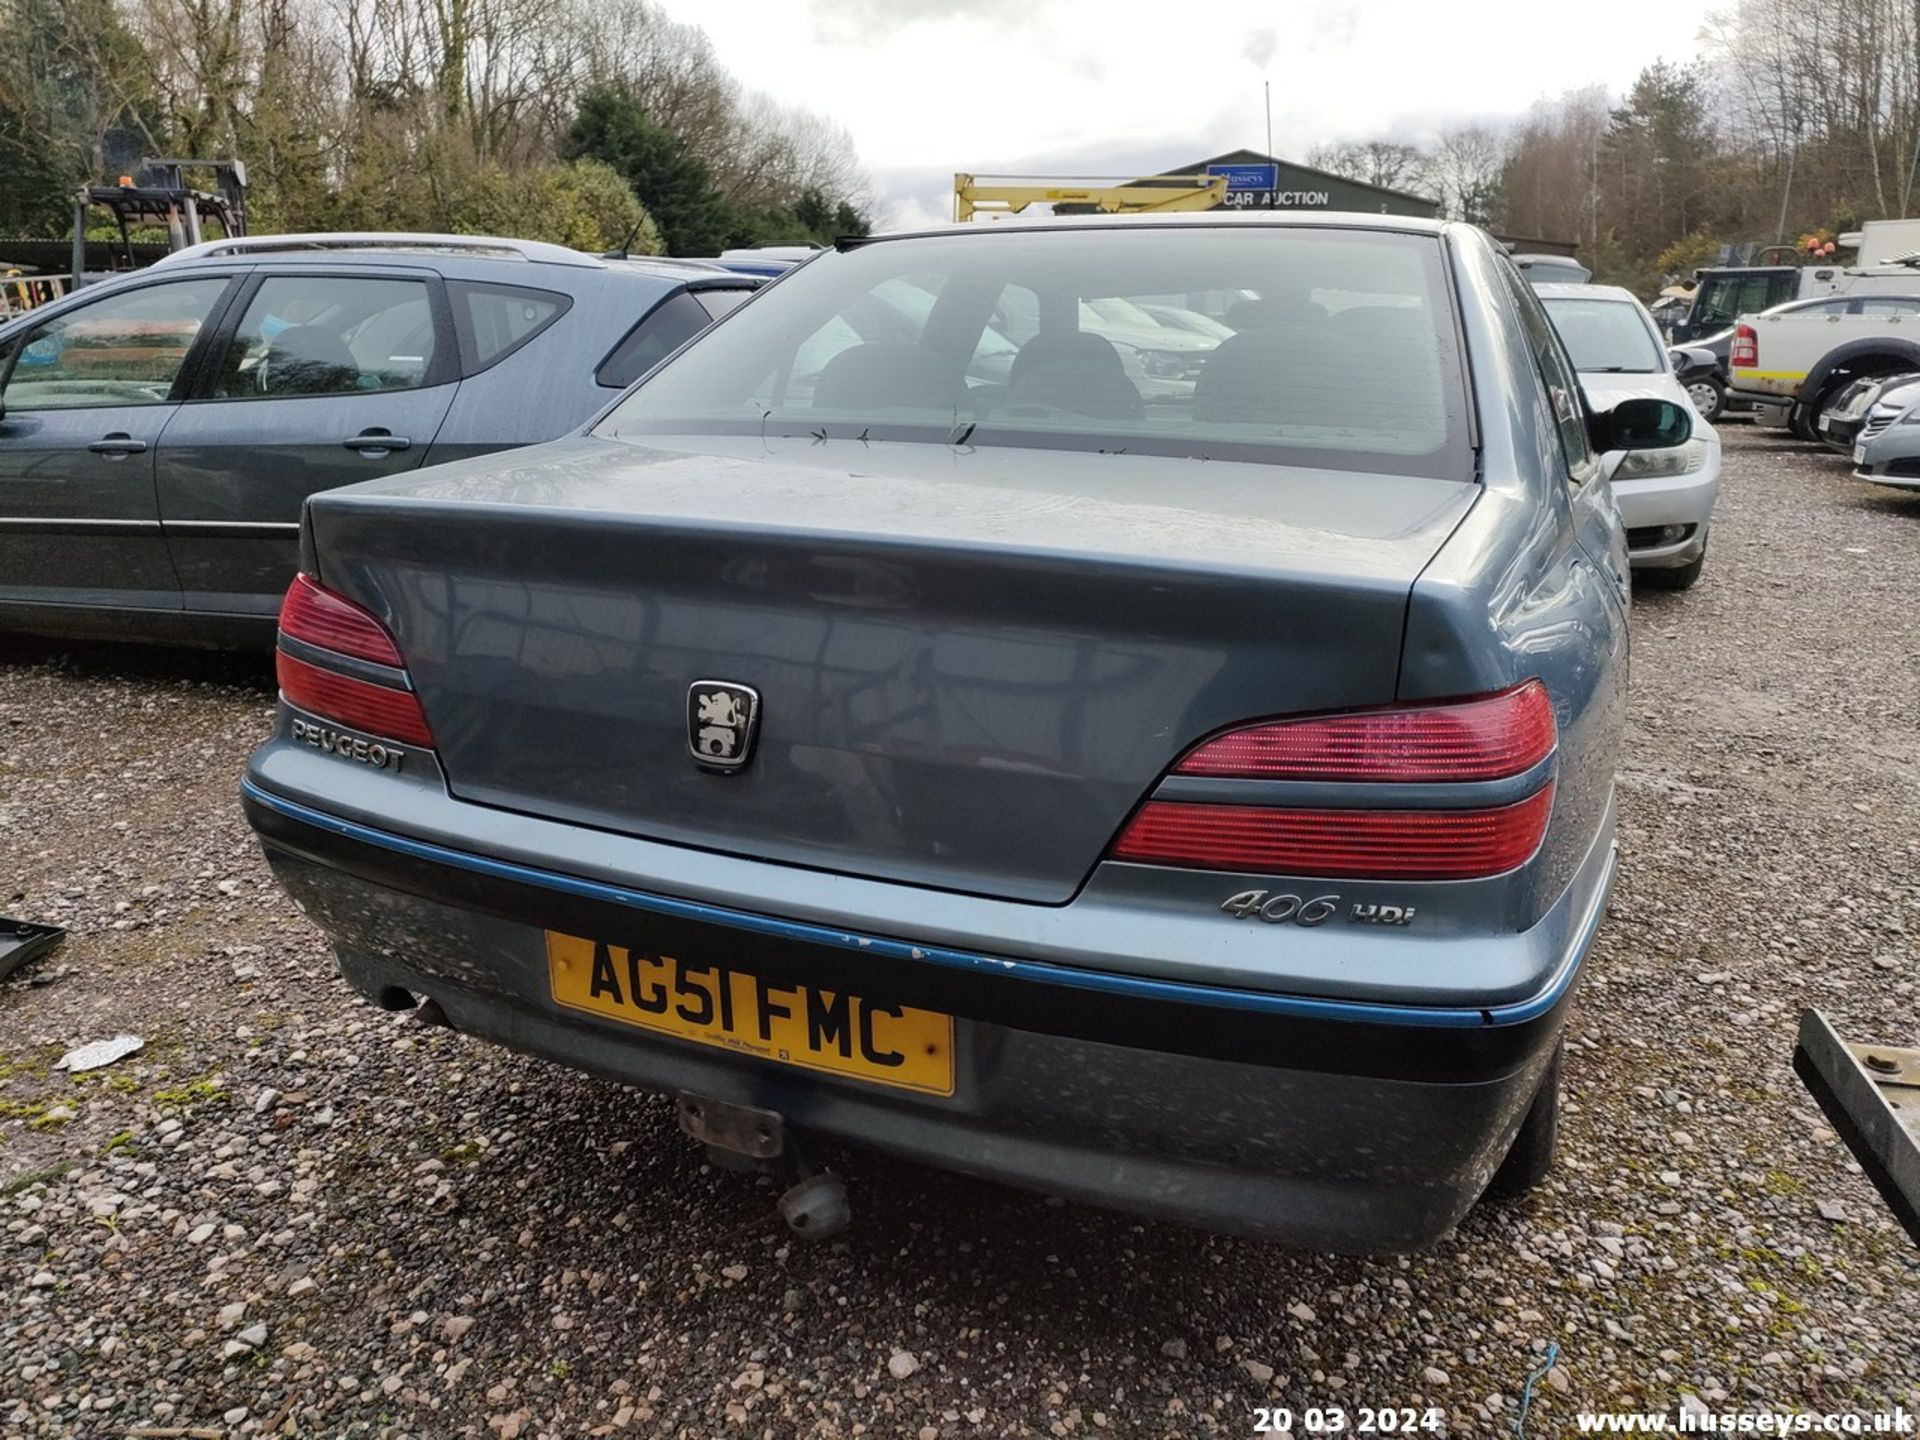 02/51 PEUGEOT 406 GTX HDI AUTO - 1997cc 4dr Saloon (Blue) - Image 31 of 59